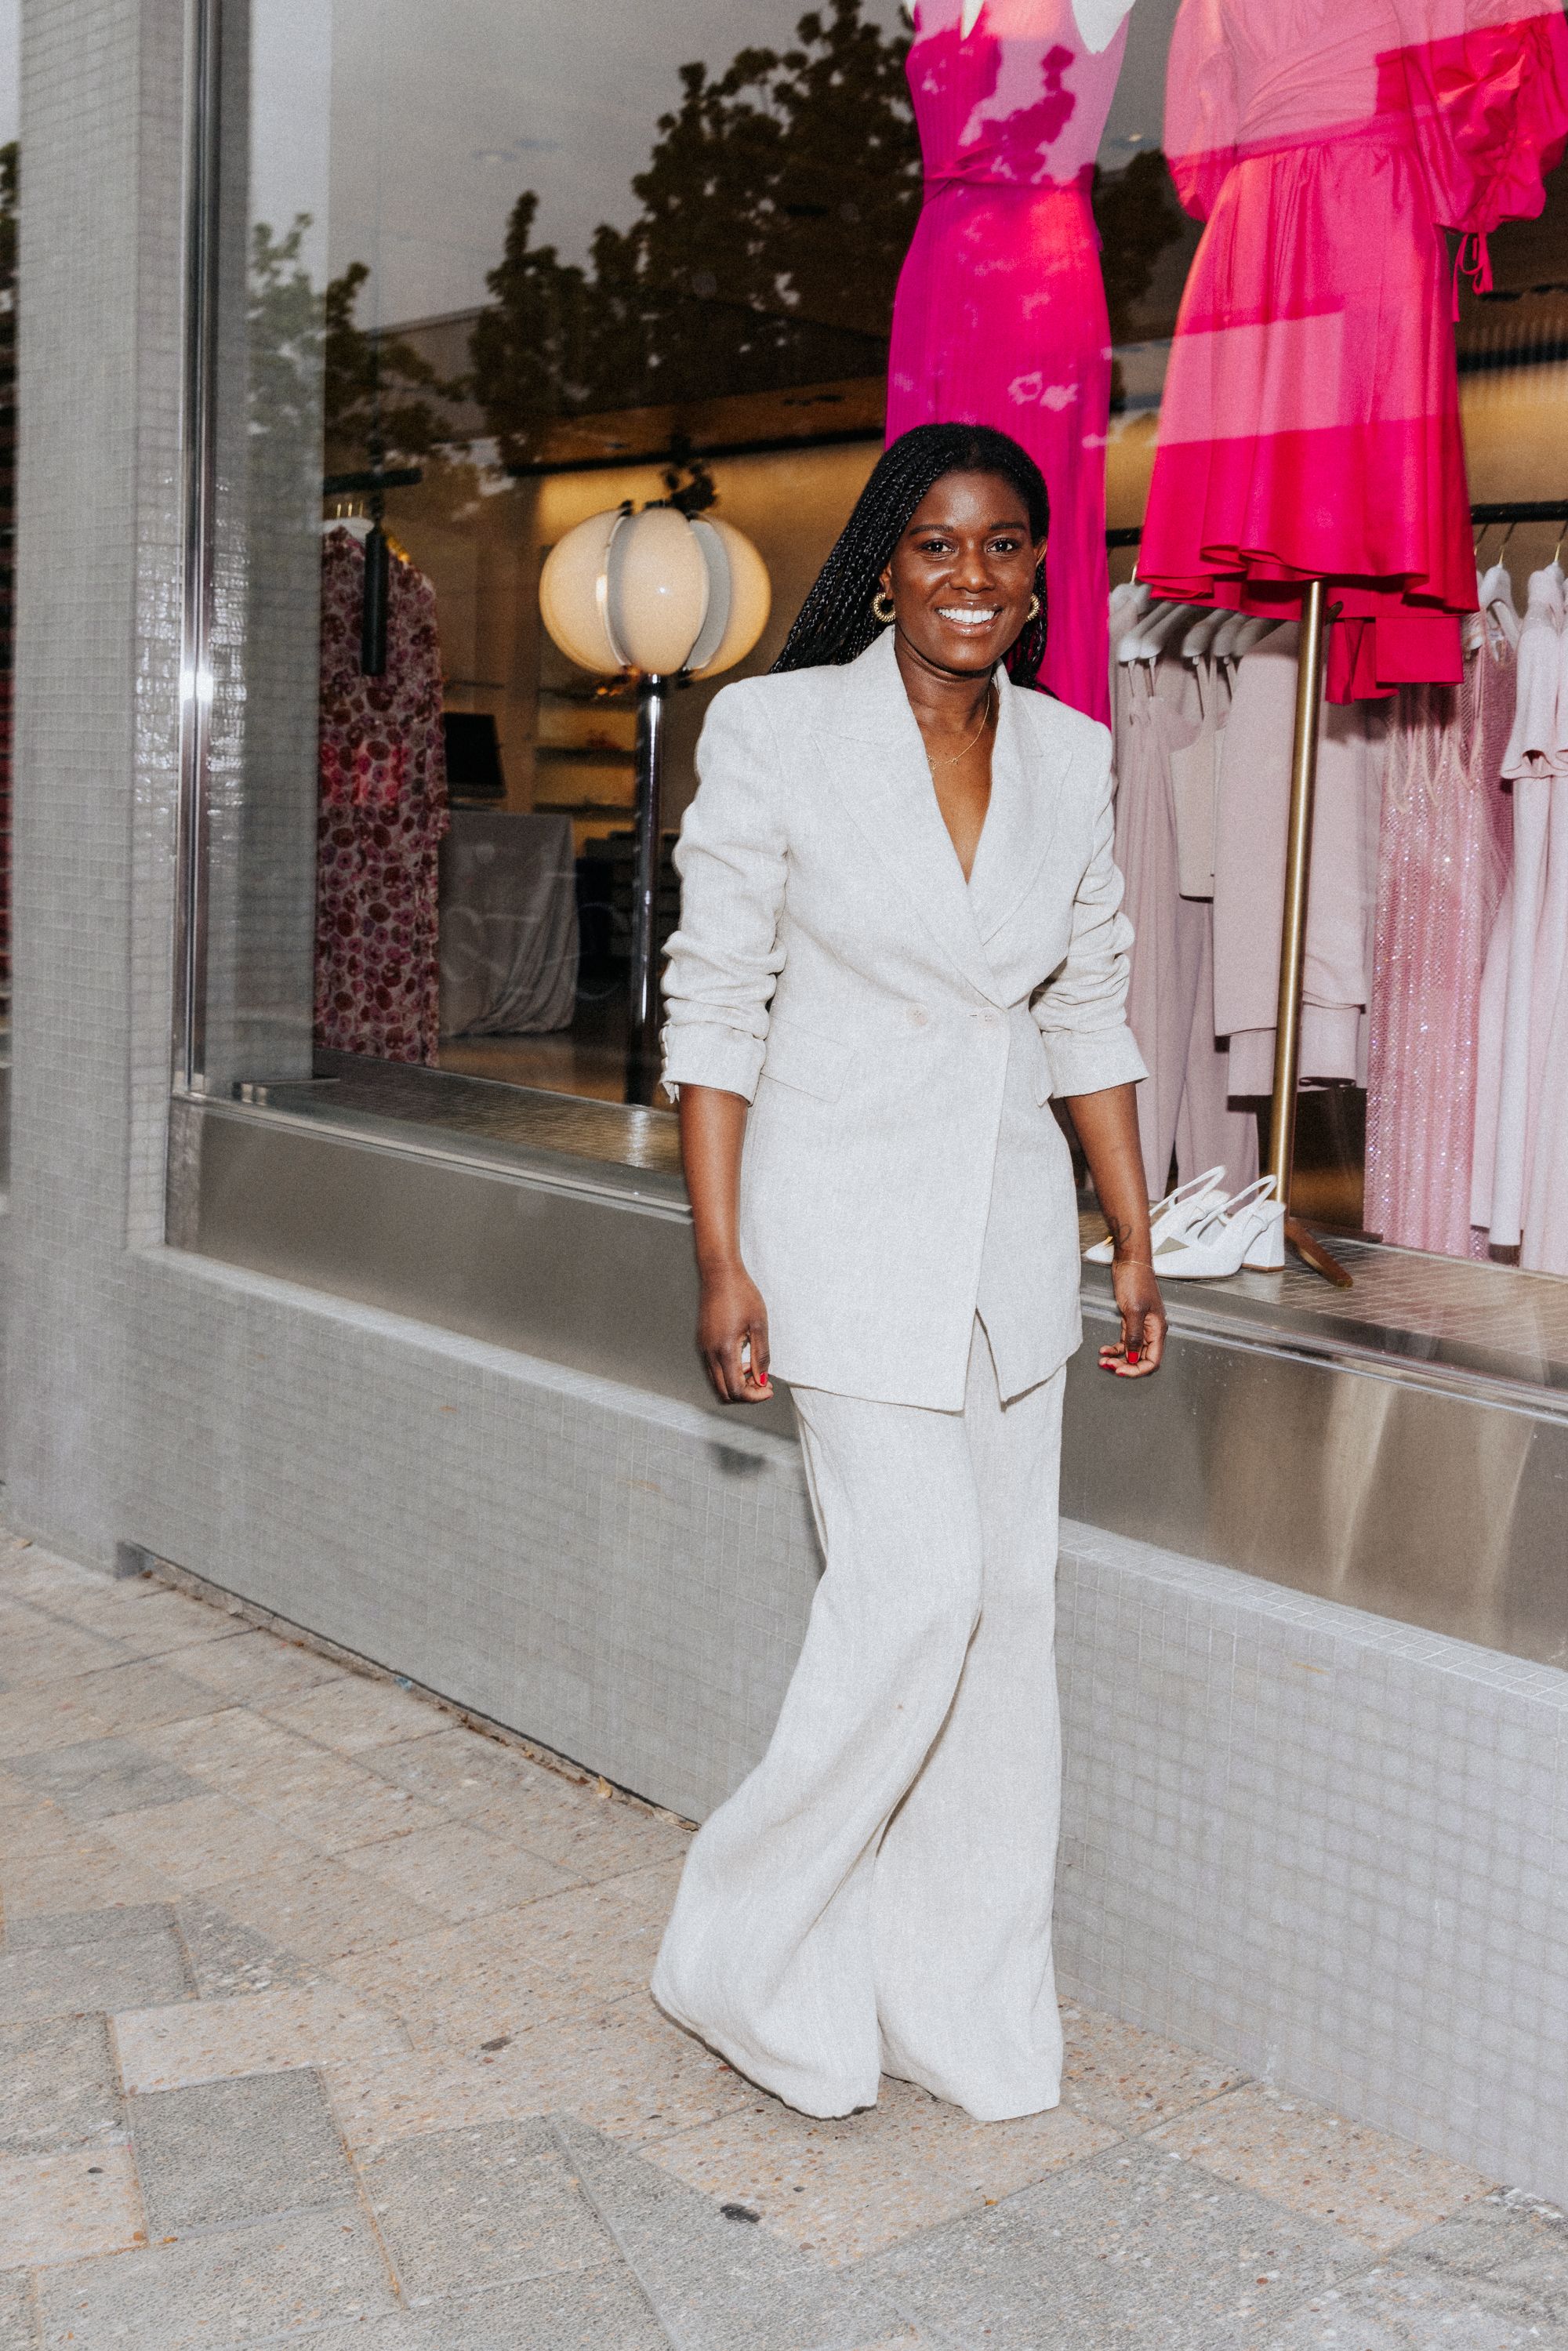 Woman smiling standing outside store in white jacket and trousers